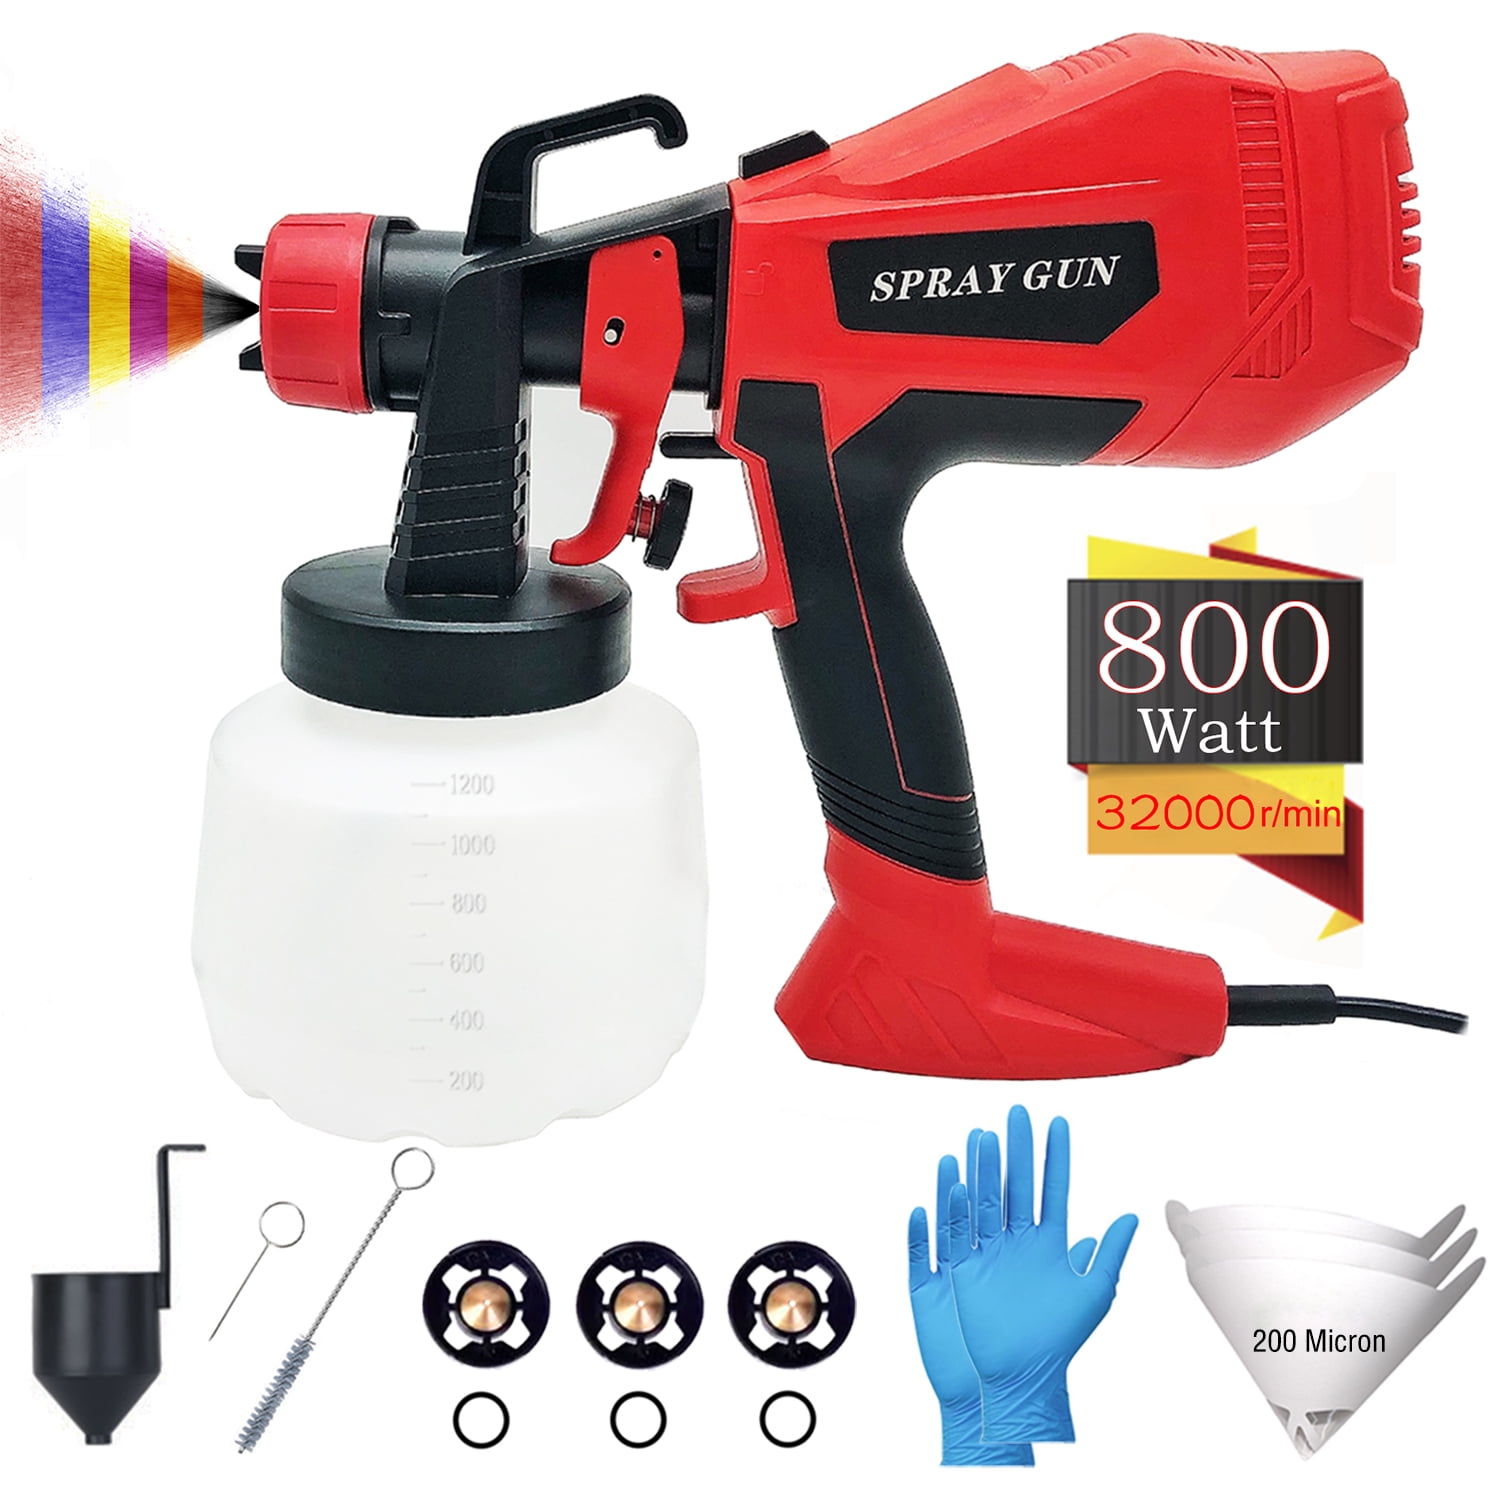 Paint Sprayer, 100ml Professional HVLP Spray Gun for Painting Cars,  Adjustable Air Paint Sprayer with 1mm Nozzle, Cleaning Kits, Handheld Spray  Gun